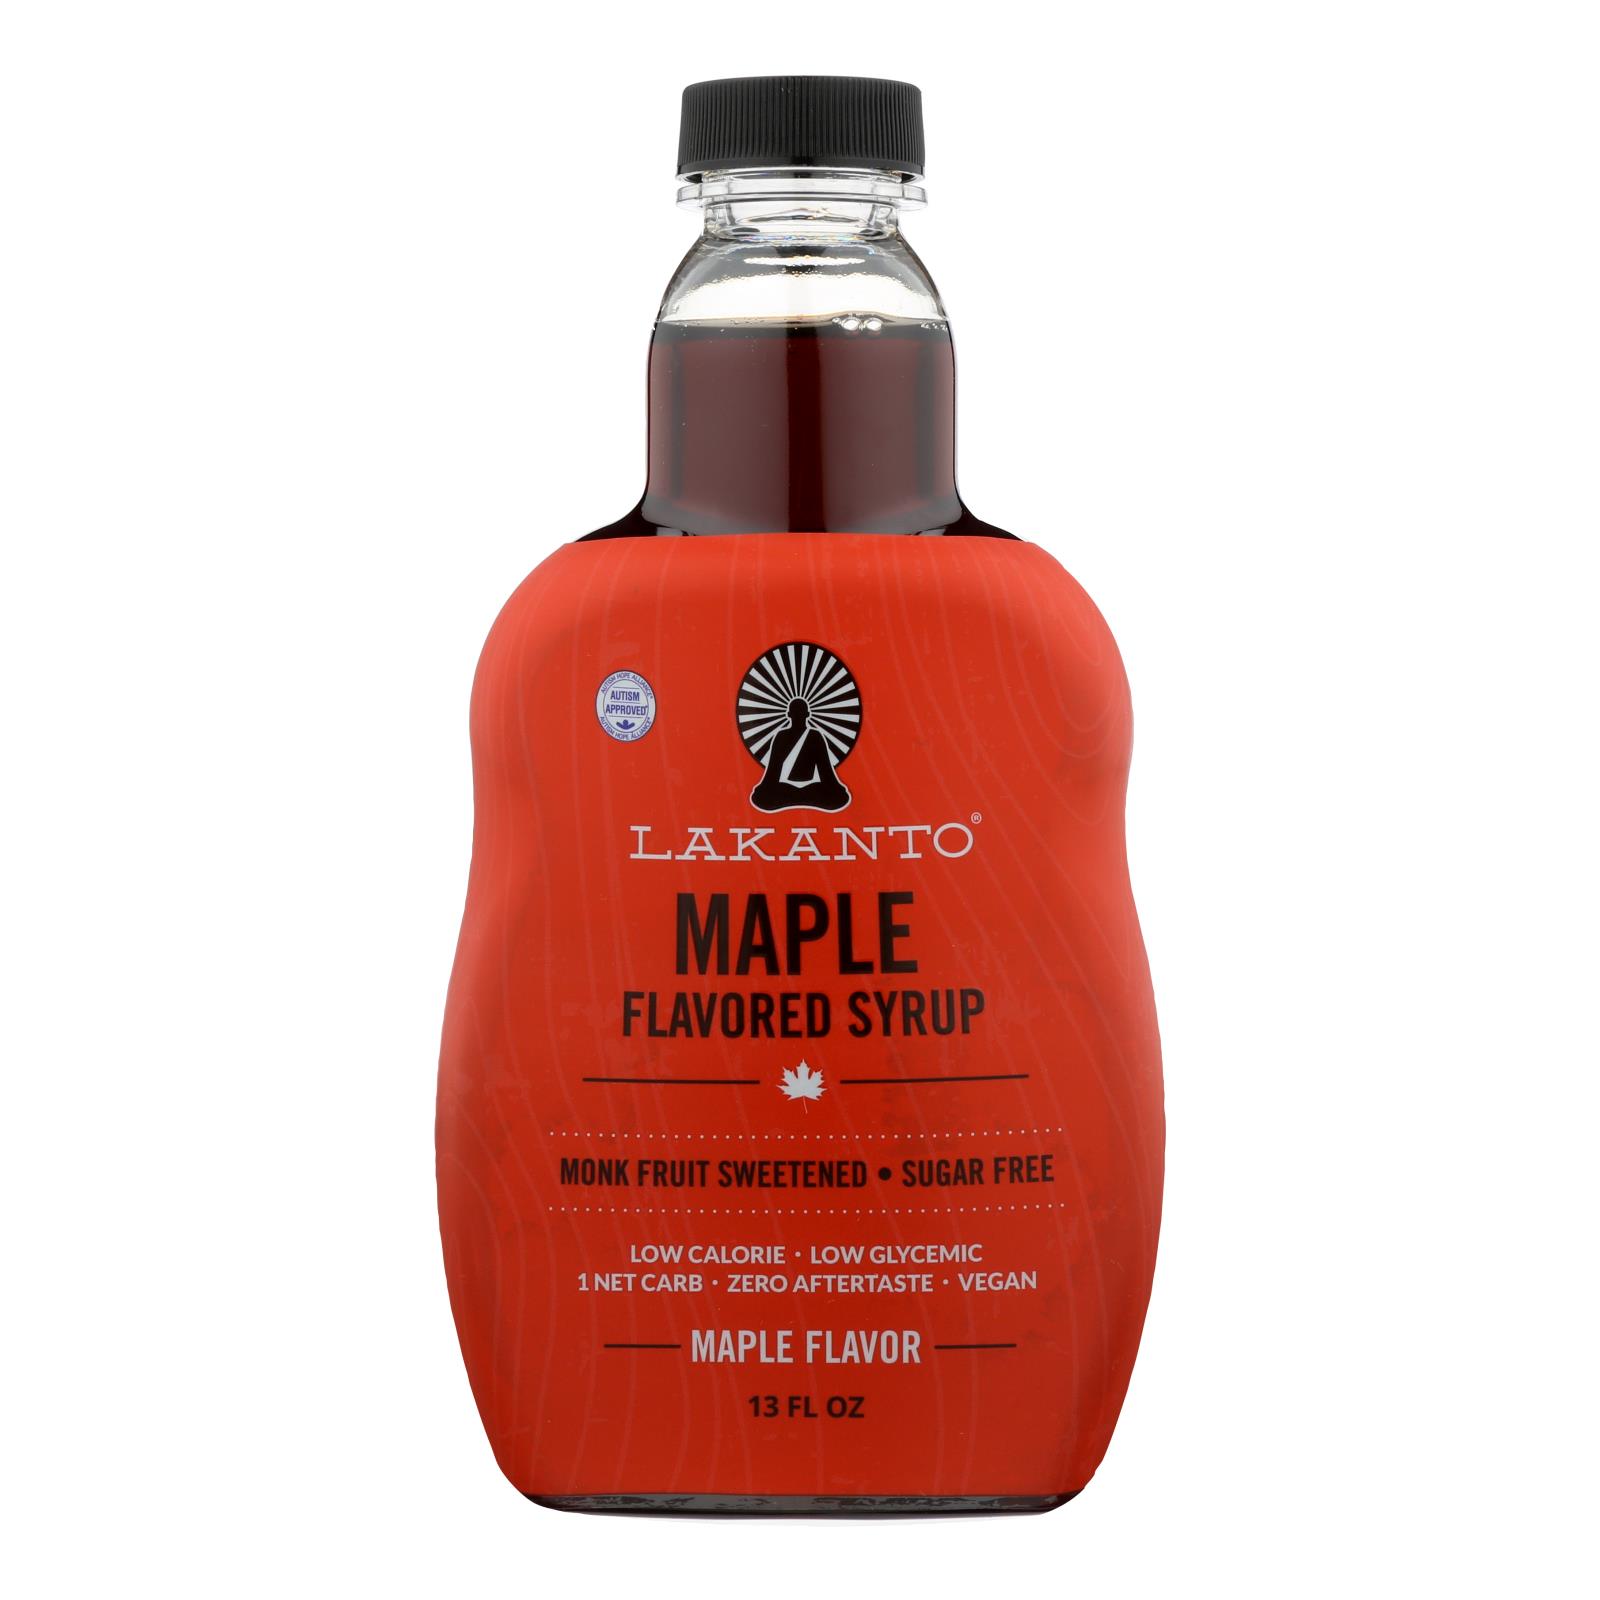 Lakanto Monk Fruit Sweetened Maple Flavored Syrup - 8개 묶음상품 - 13 FZ